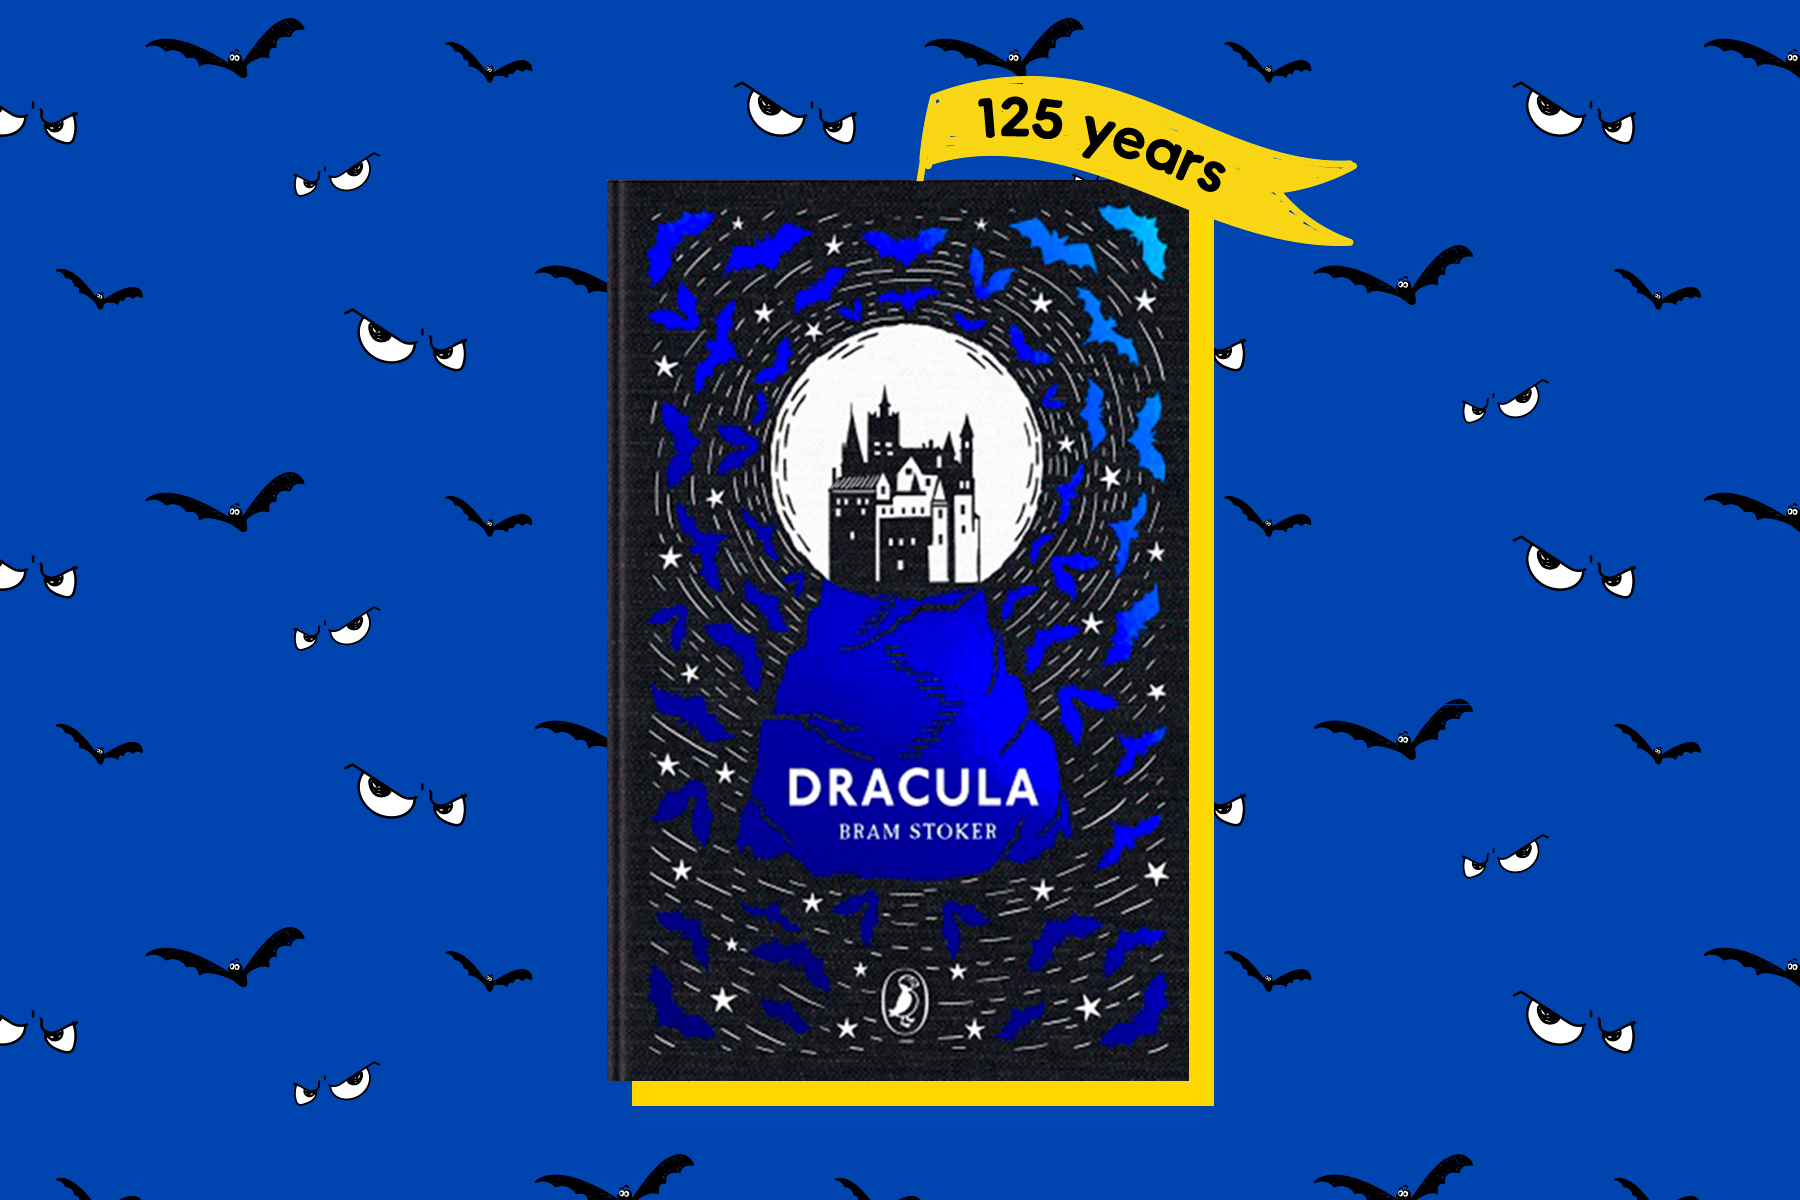 An image of the Puffin Clothbound Classics book Dracula by Bram Stoker on a dark blue background with bats and angry eyes. There is also a little yellow flag that says '125 years'